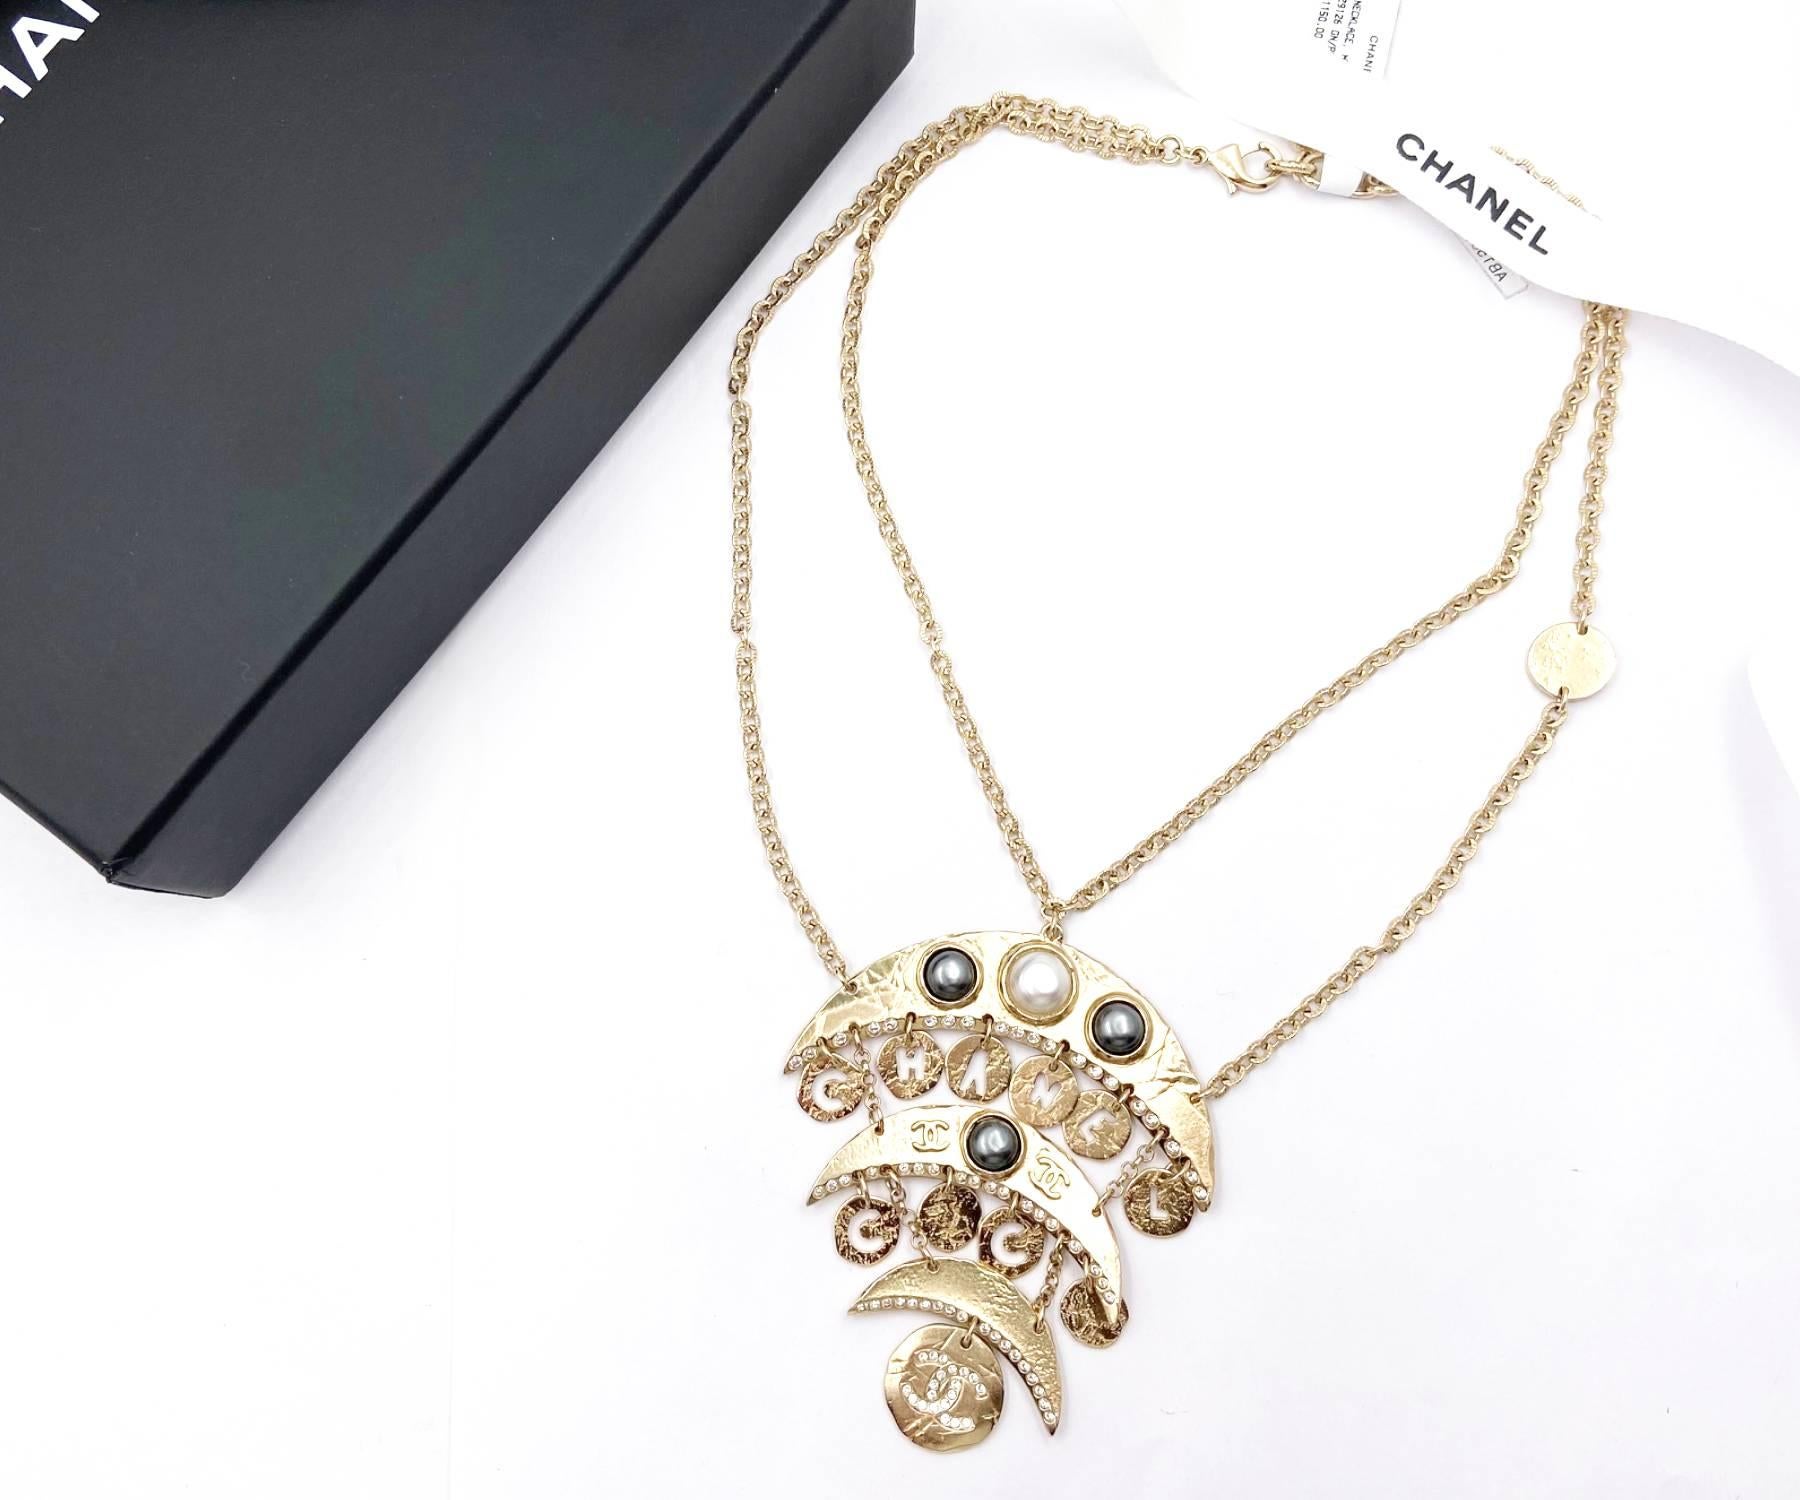 Chanel Brand New Gold CC Moon Crystal Faux Pearl Chain Necklace

*Marked 19
*Made in France
*Comes with original box, dustbag, tag, ribbon, ribbon and tag
*Brand New

-It is approximately 16″ long.
-The CC pendant is approximately 2.5″ x